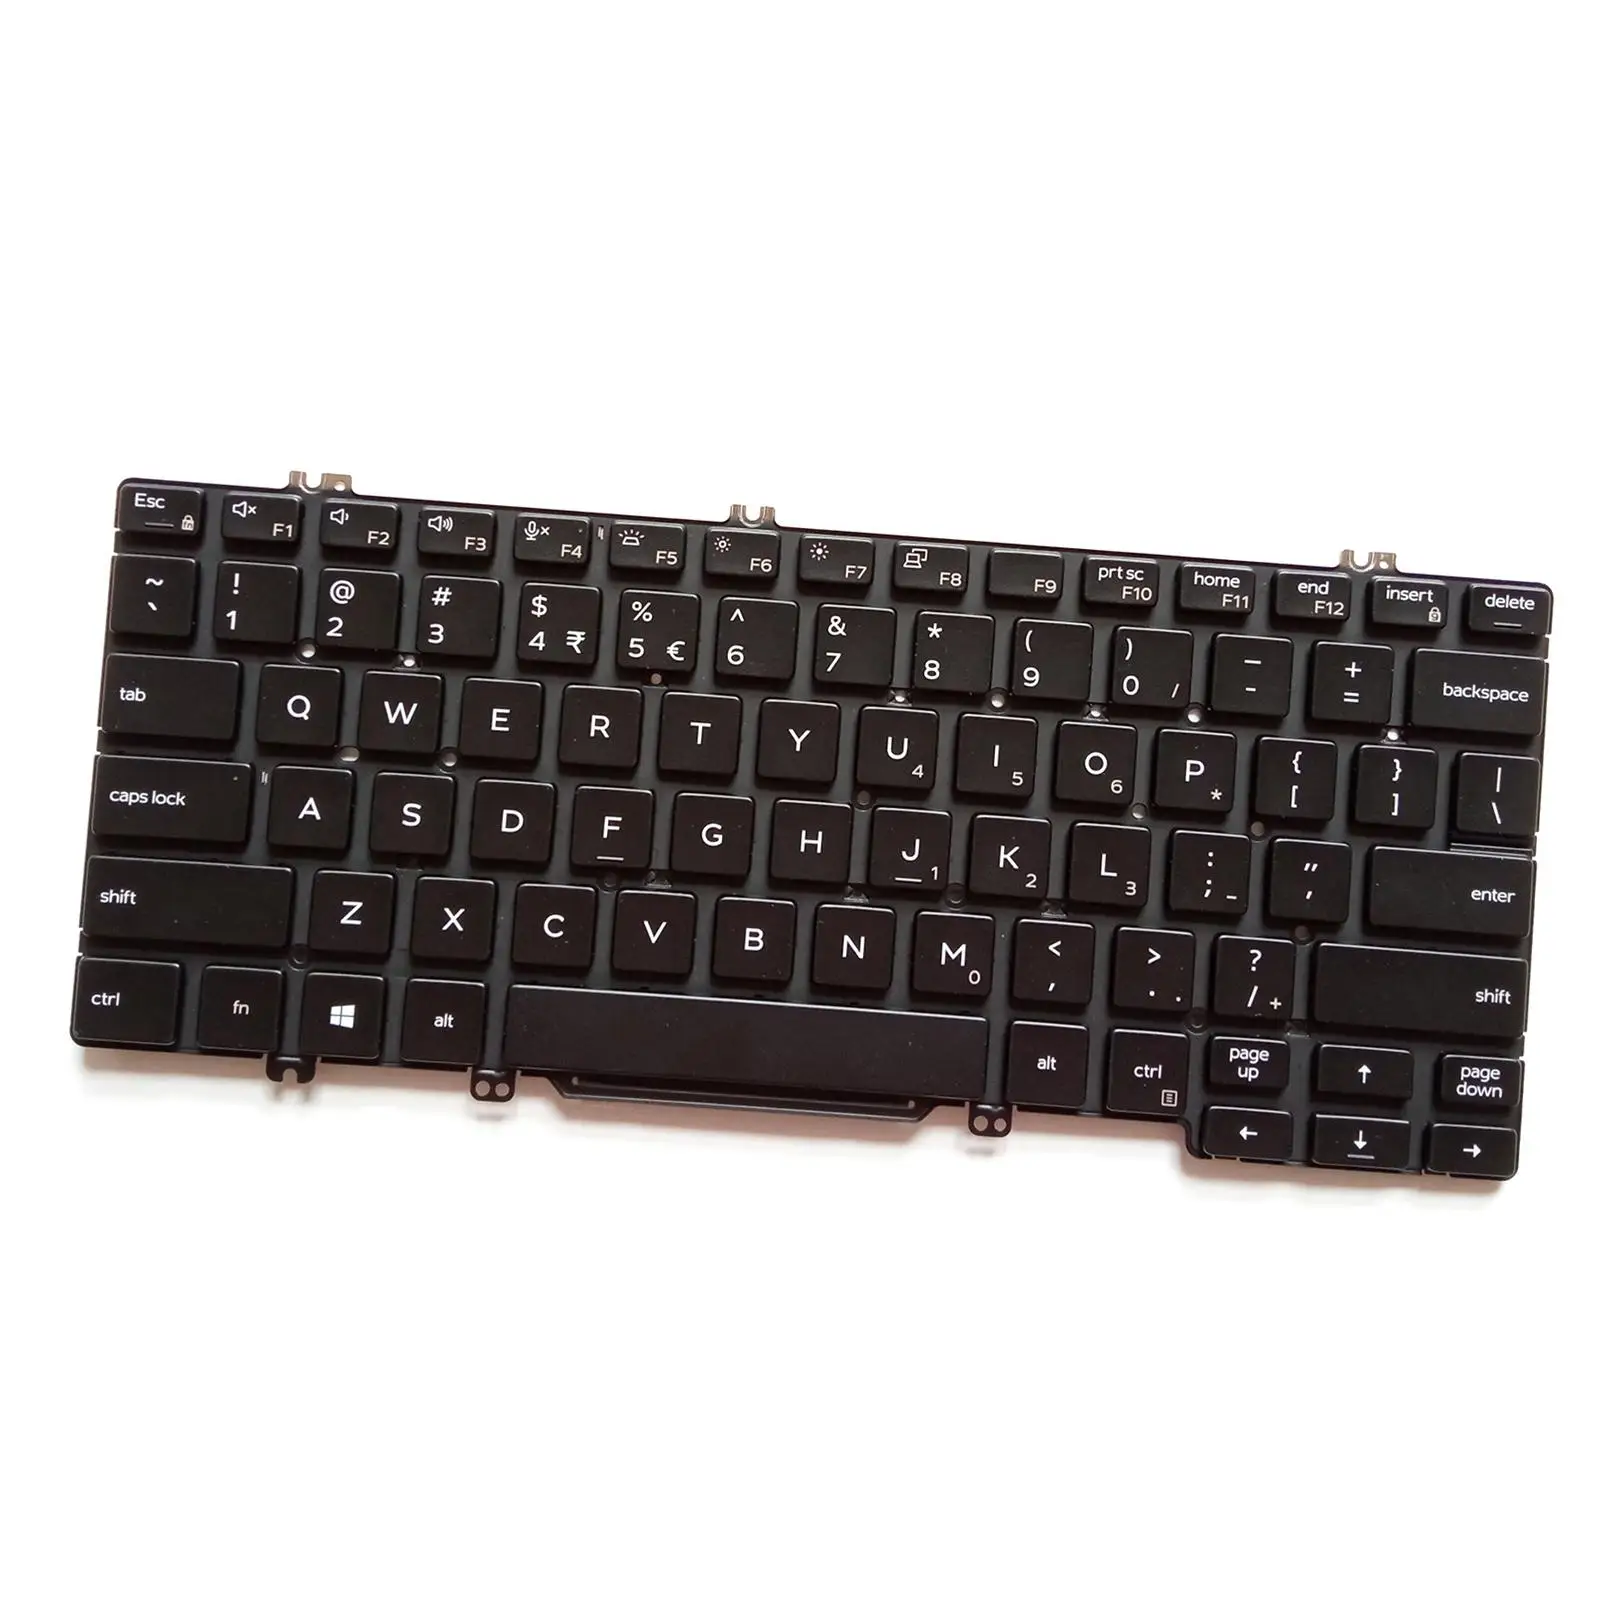 Laptop Replacement Keyboard English with Backlit for Dell Latitude 7300 E7300 5300 Parts